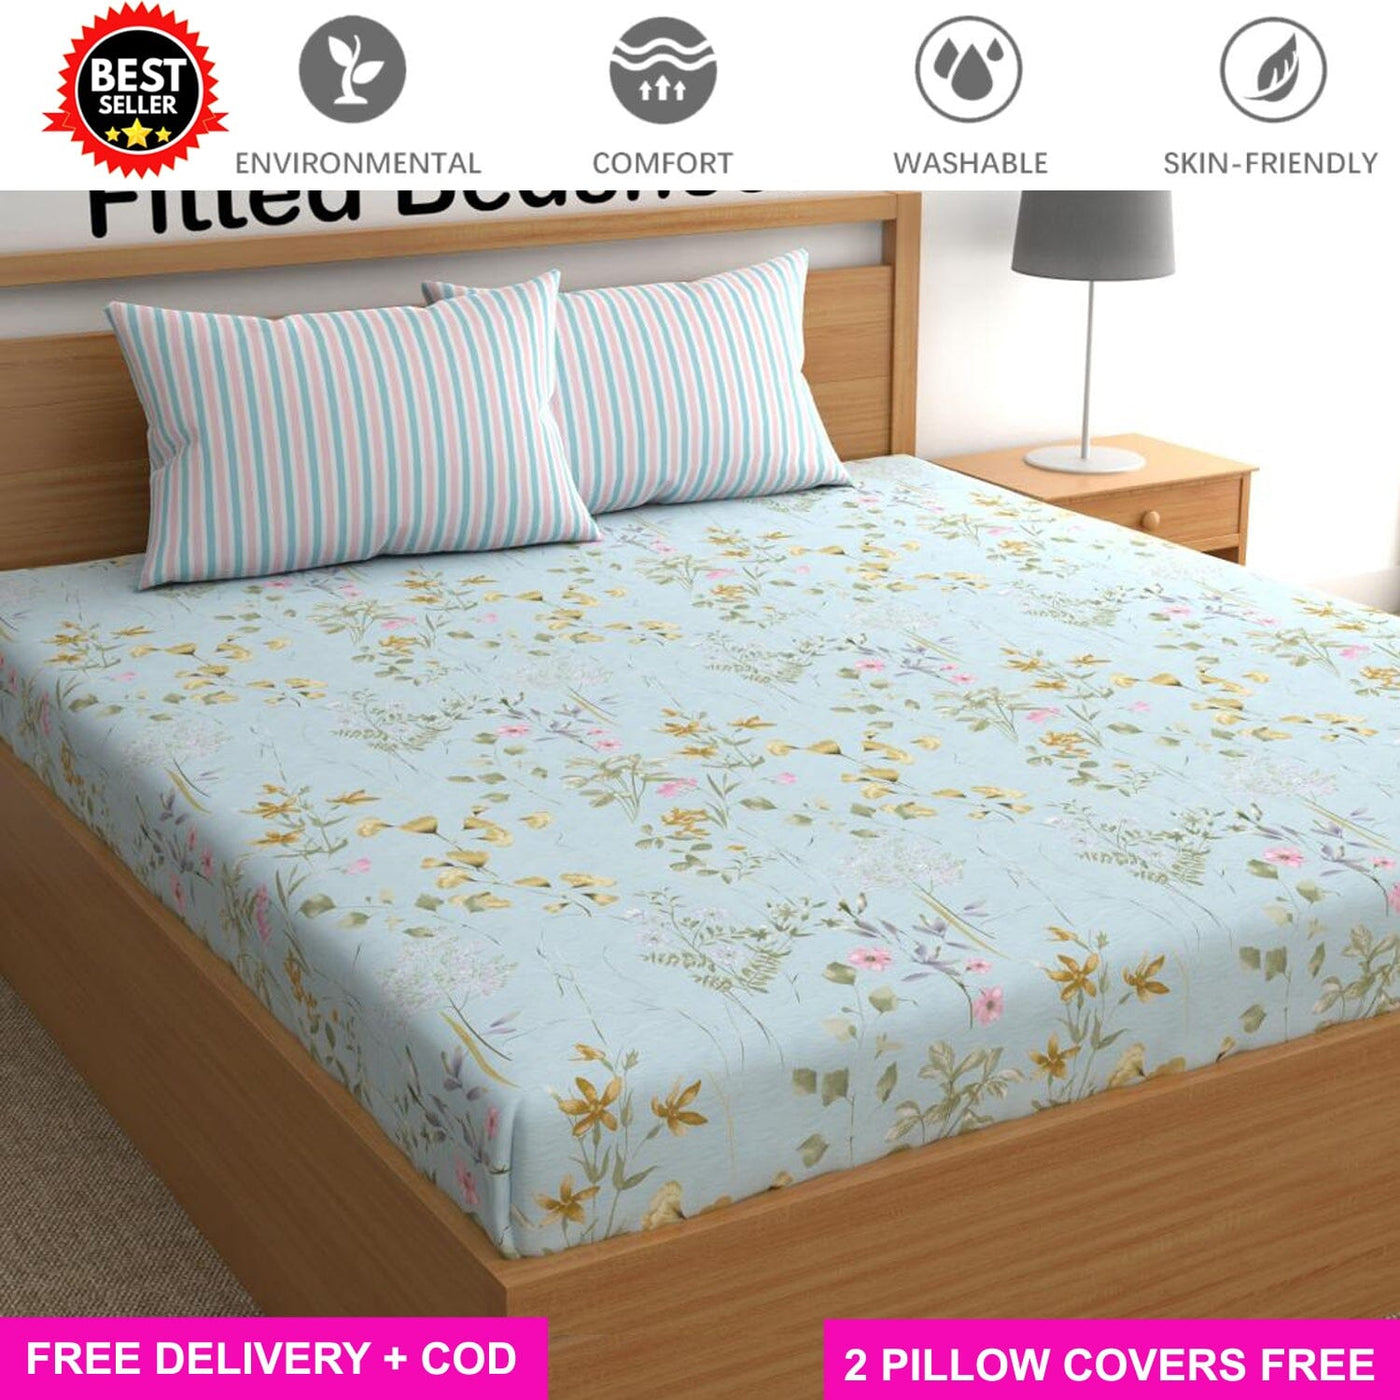 Blue Floral Contrast Full Elastic Fitted Bedsheet with 2 Pillow Covers - King Size Bed Sheets Great Happy IN 